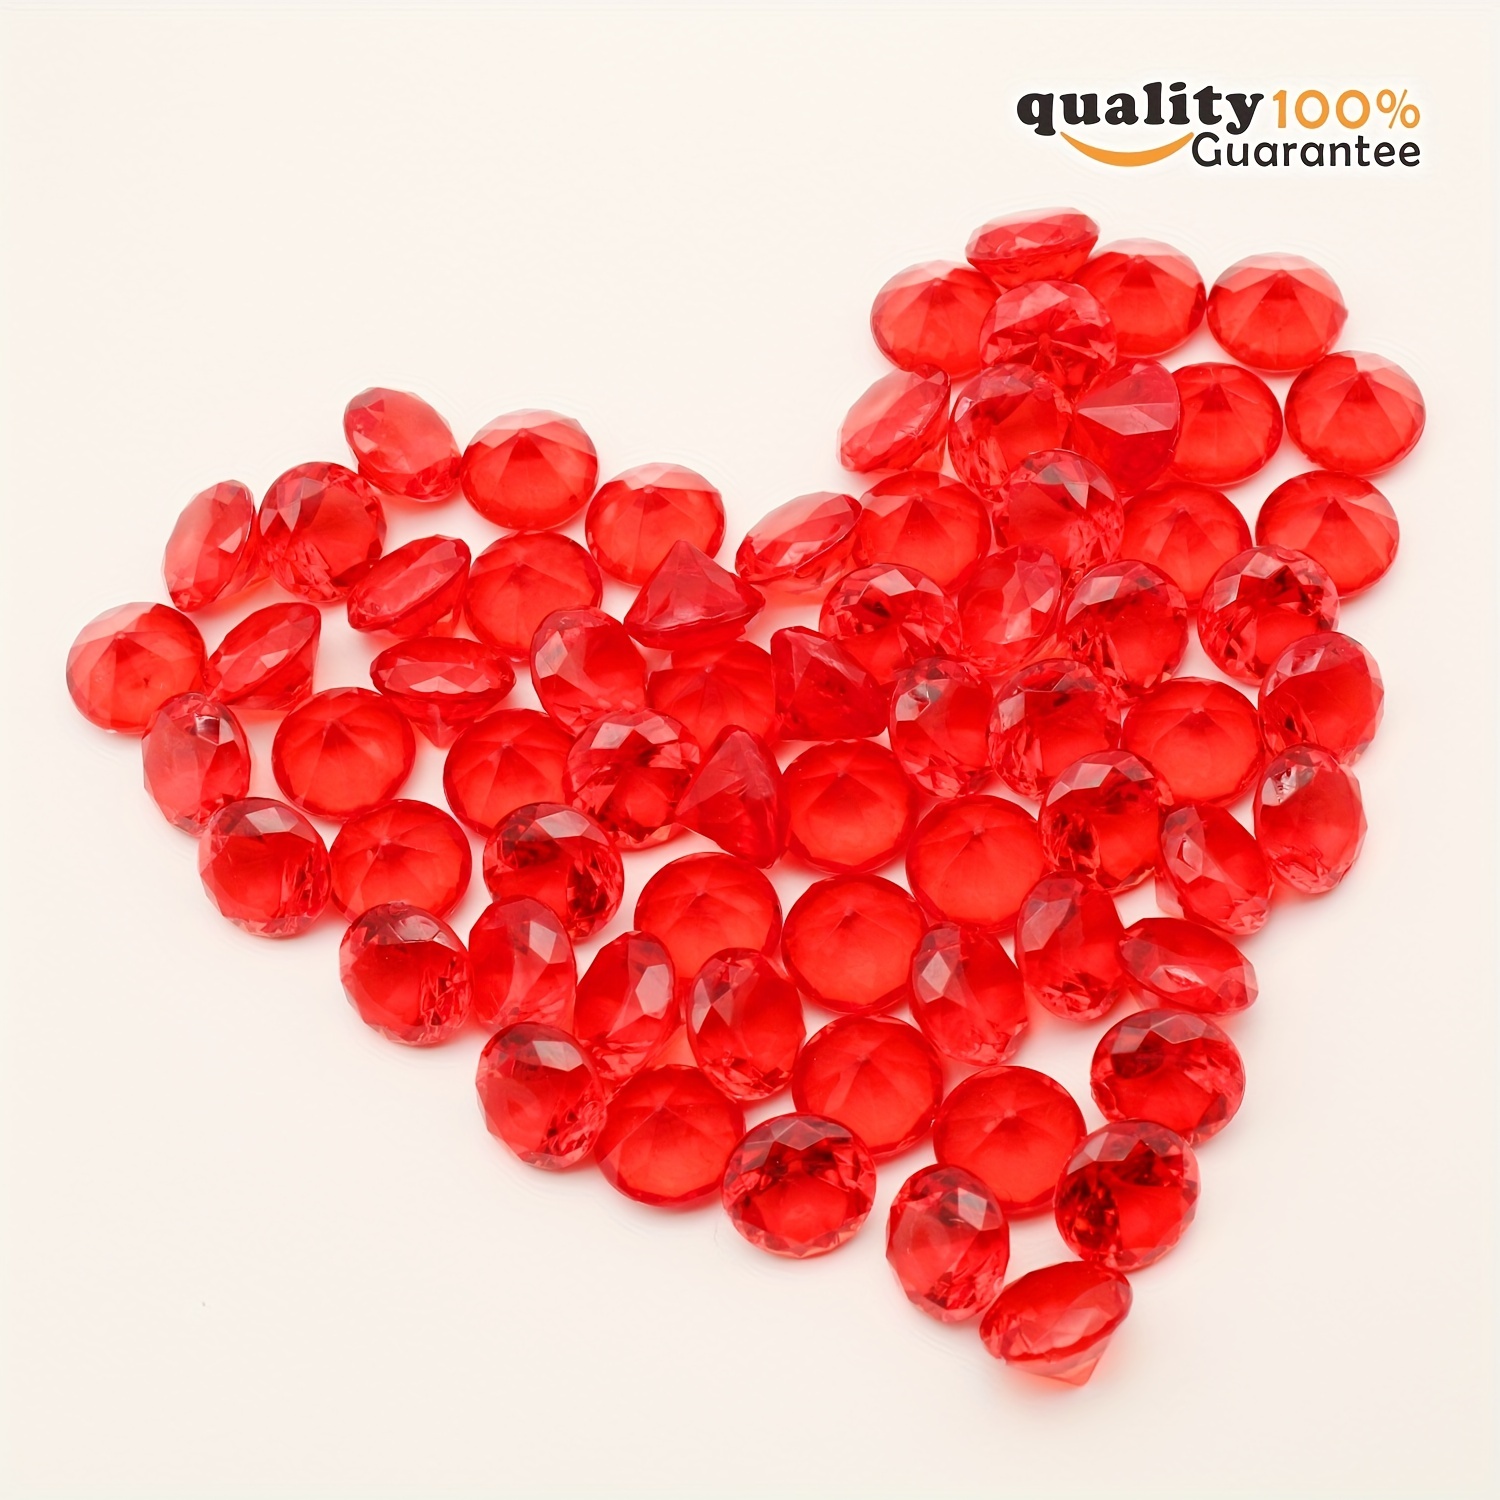 Acrylic Heart-Shaped Ruby Red Gemstone Vase Fillers